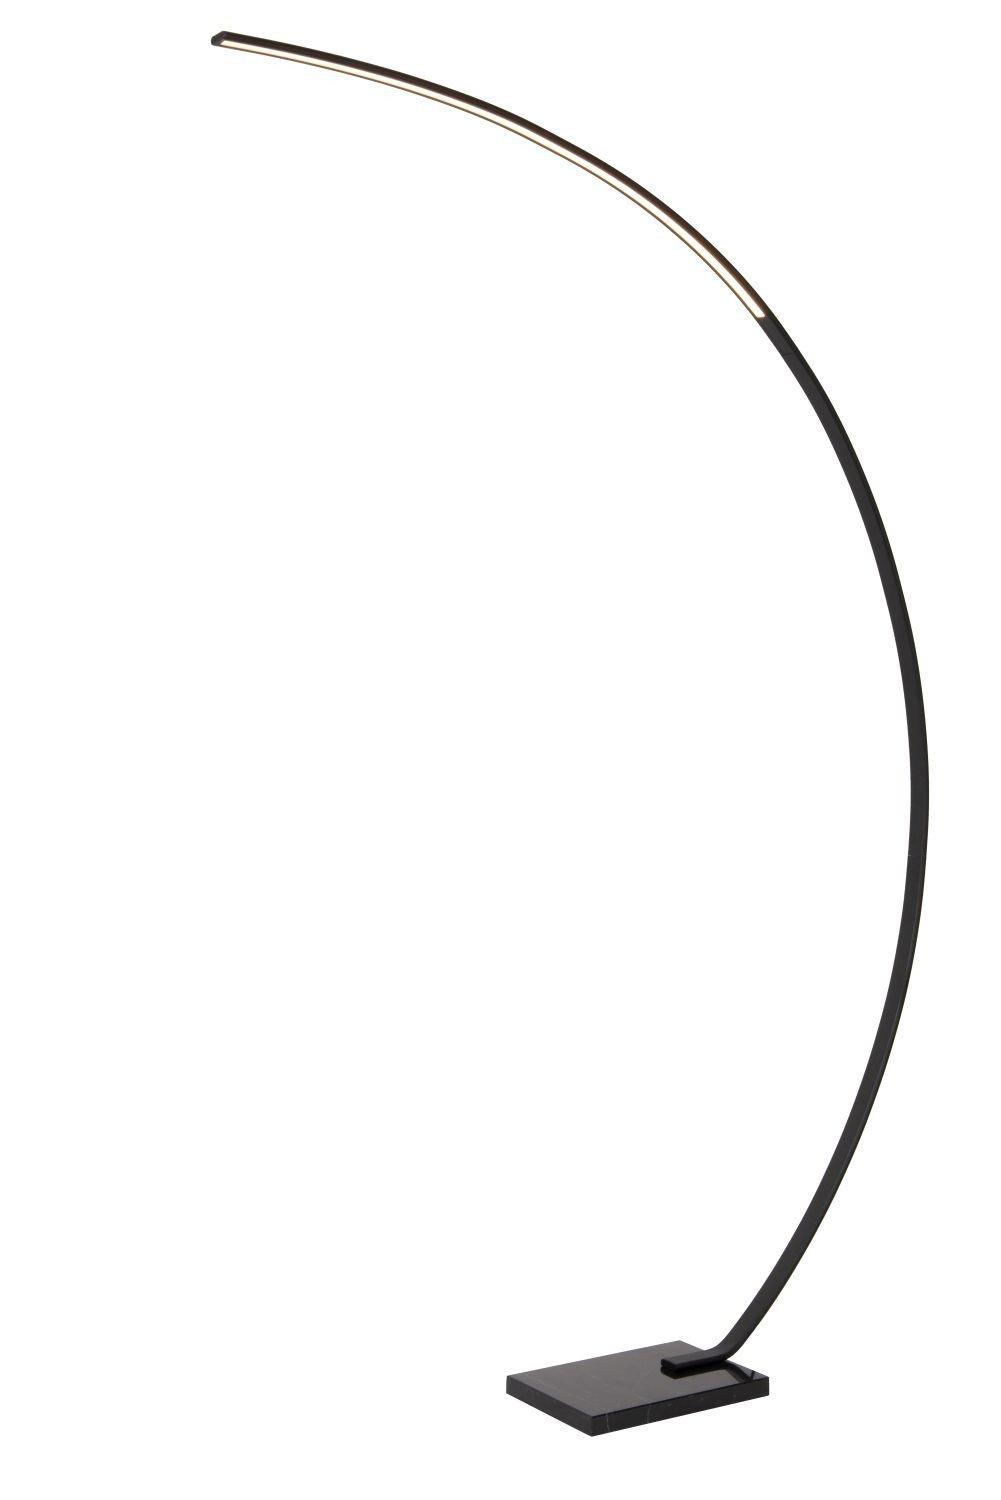 Lucide CURVE Arc Floor Lamp 2700K Dimmable LED 15W Modern Free Standing Lighting